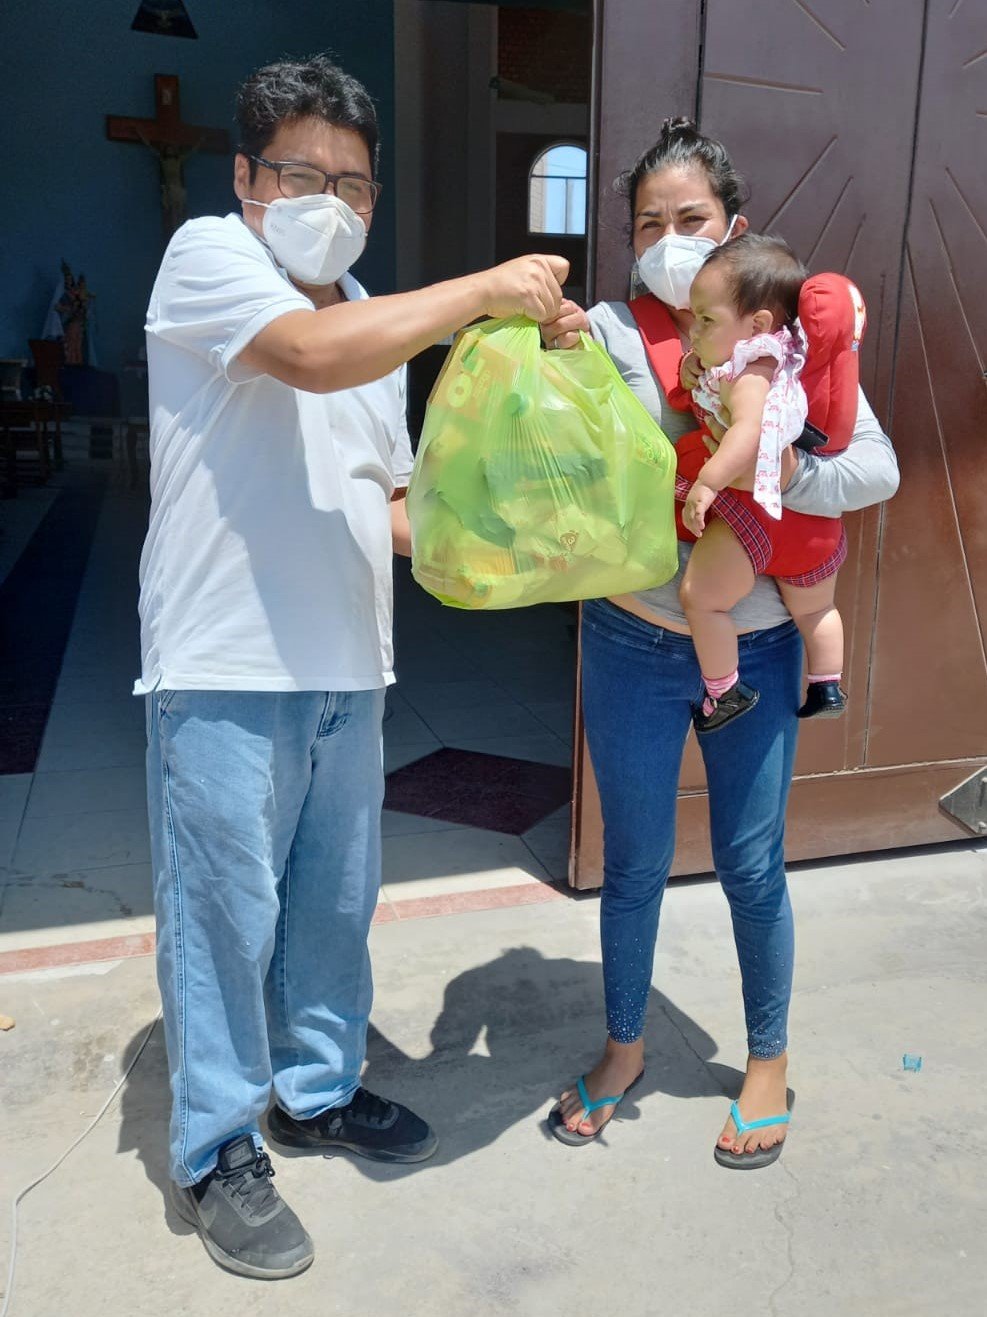 Father César Anicama ministers to people during their pain and suffering in the Peruvian coastal city of Villa El Salvador while serving with the Missionary Society of St. James the Apostle during the COVID-19 pandemic. Here, he is seen delivering bags of food to people who are hungry.